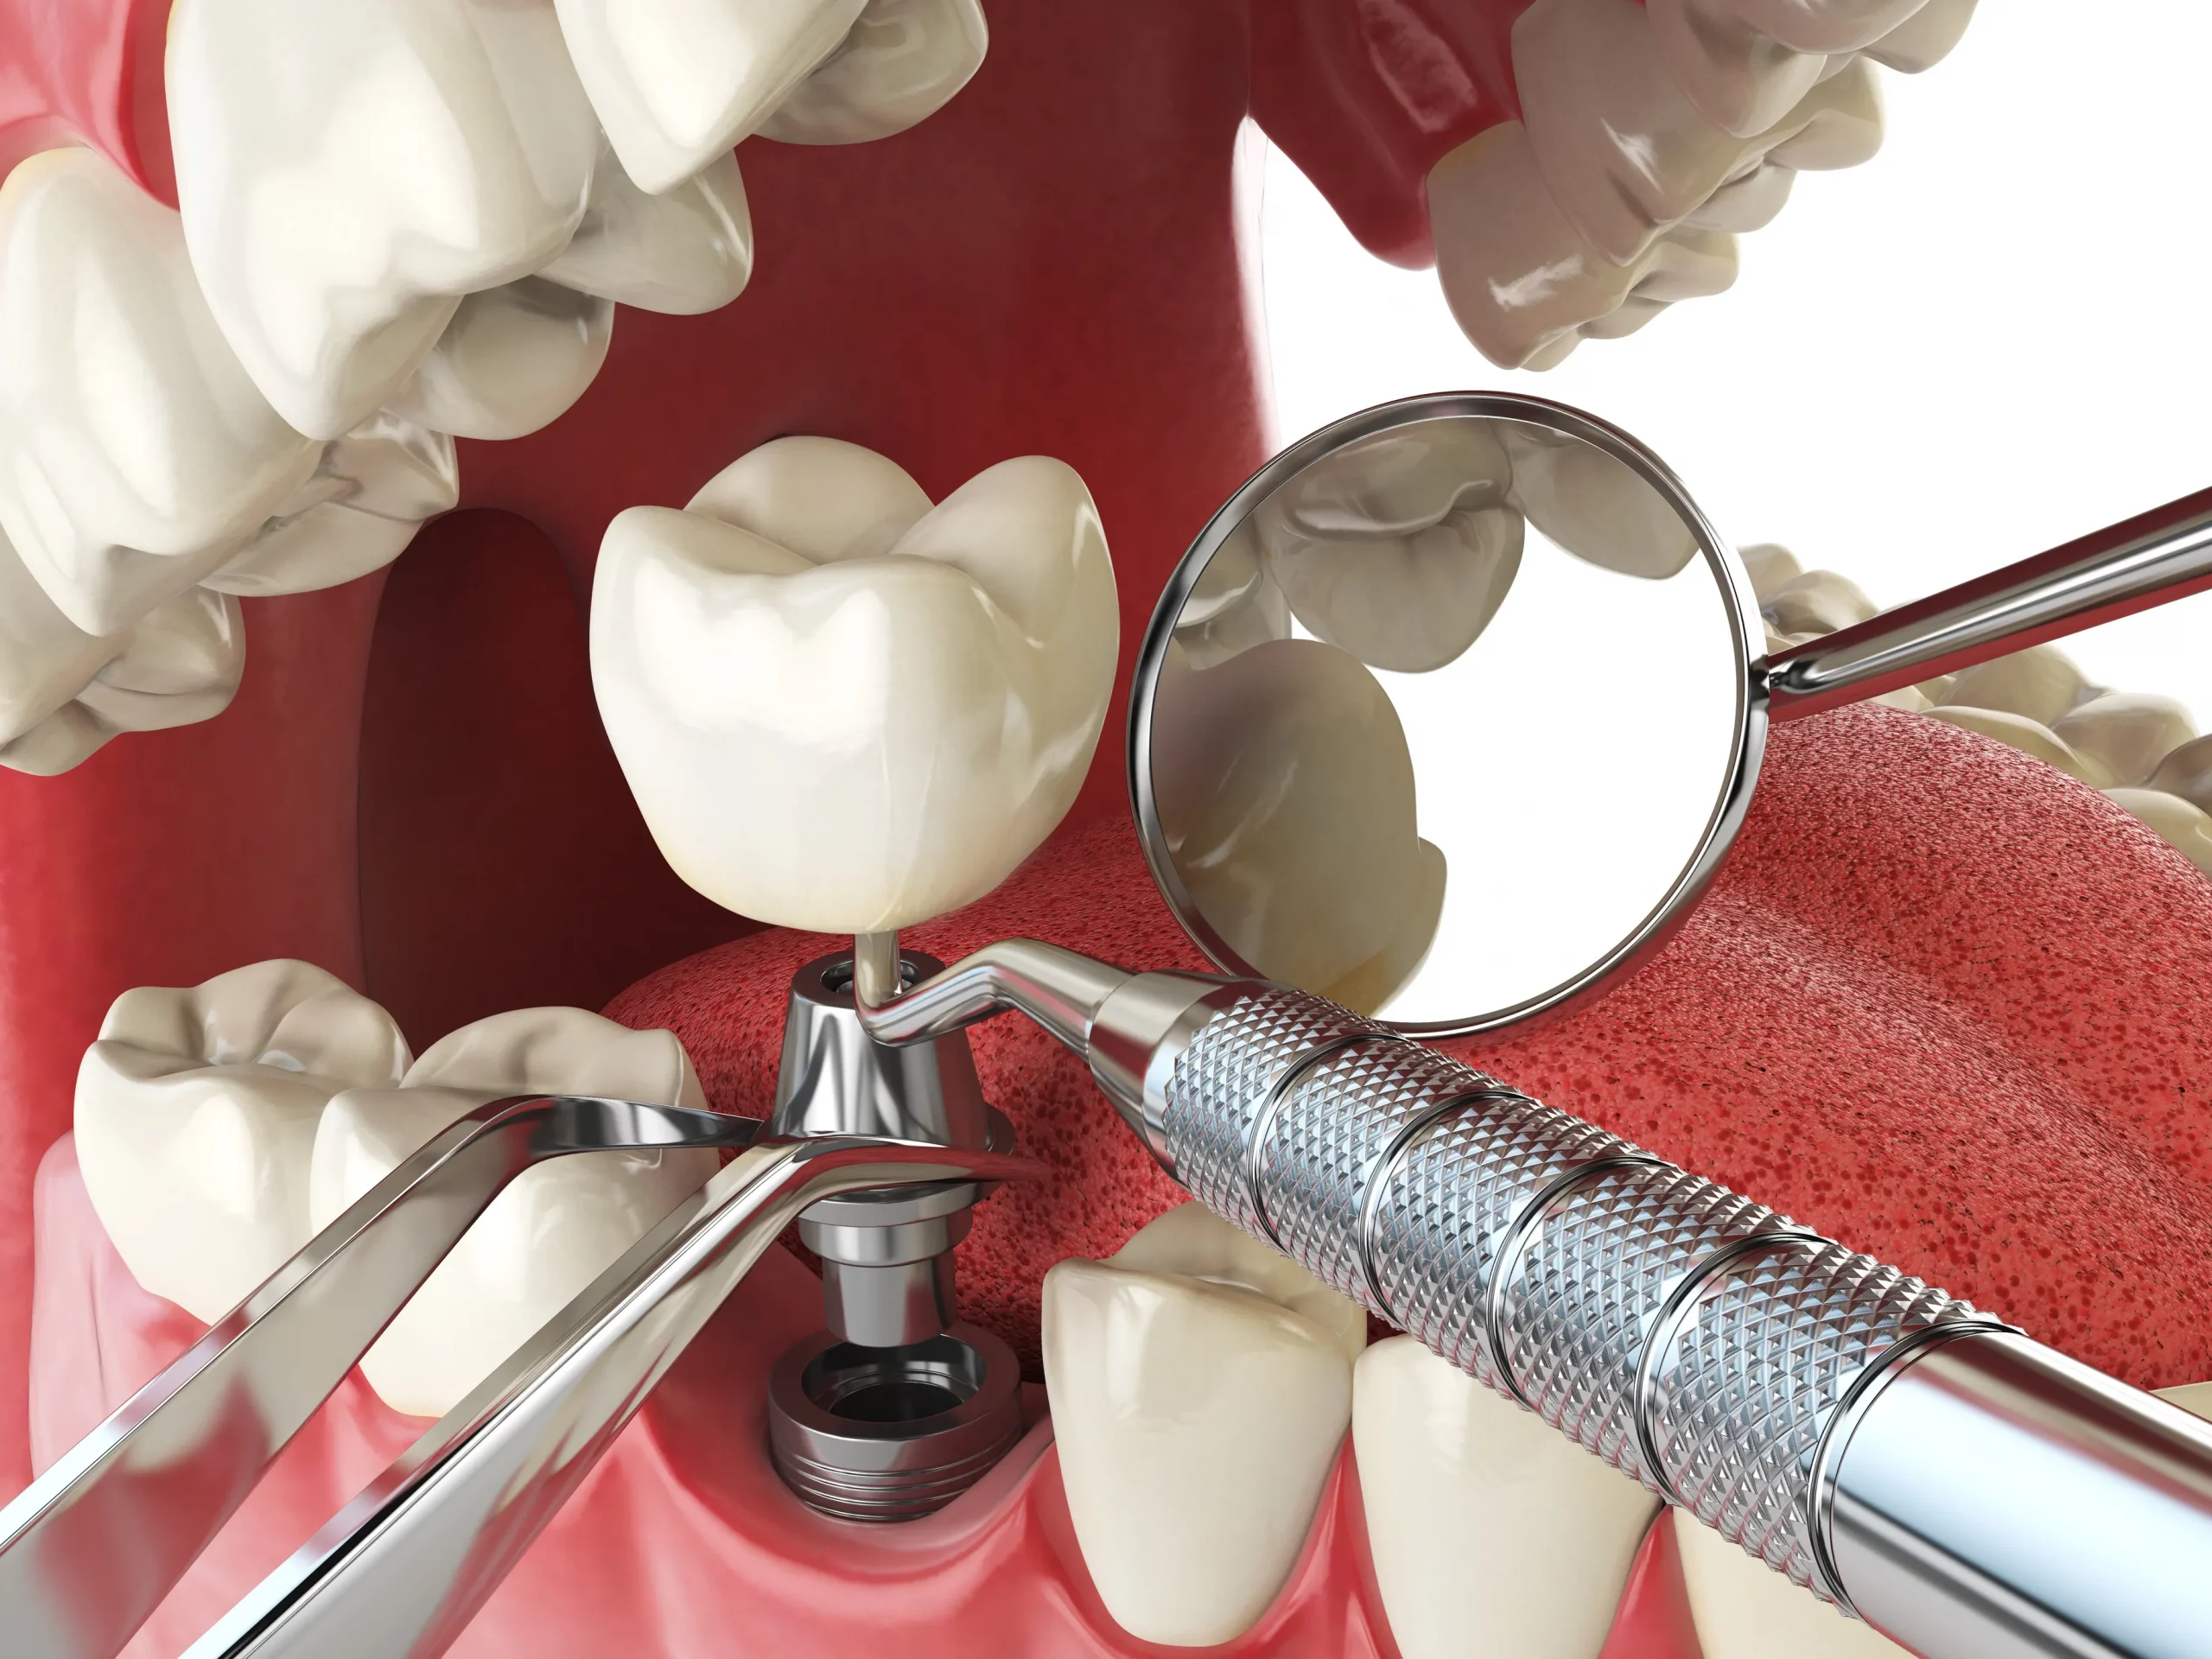 dental implants in Pearland, TX